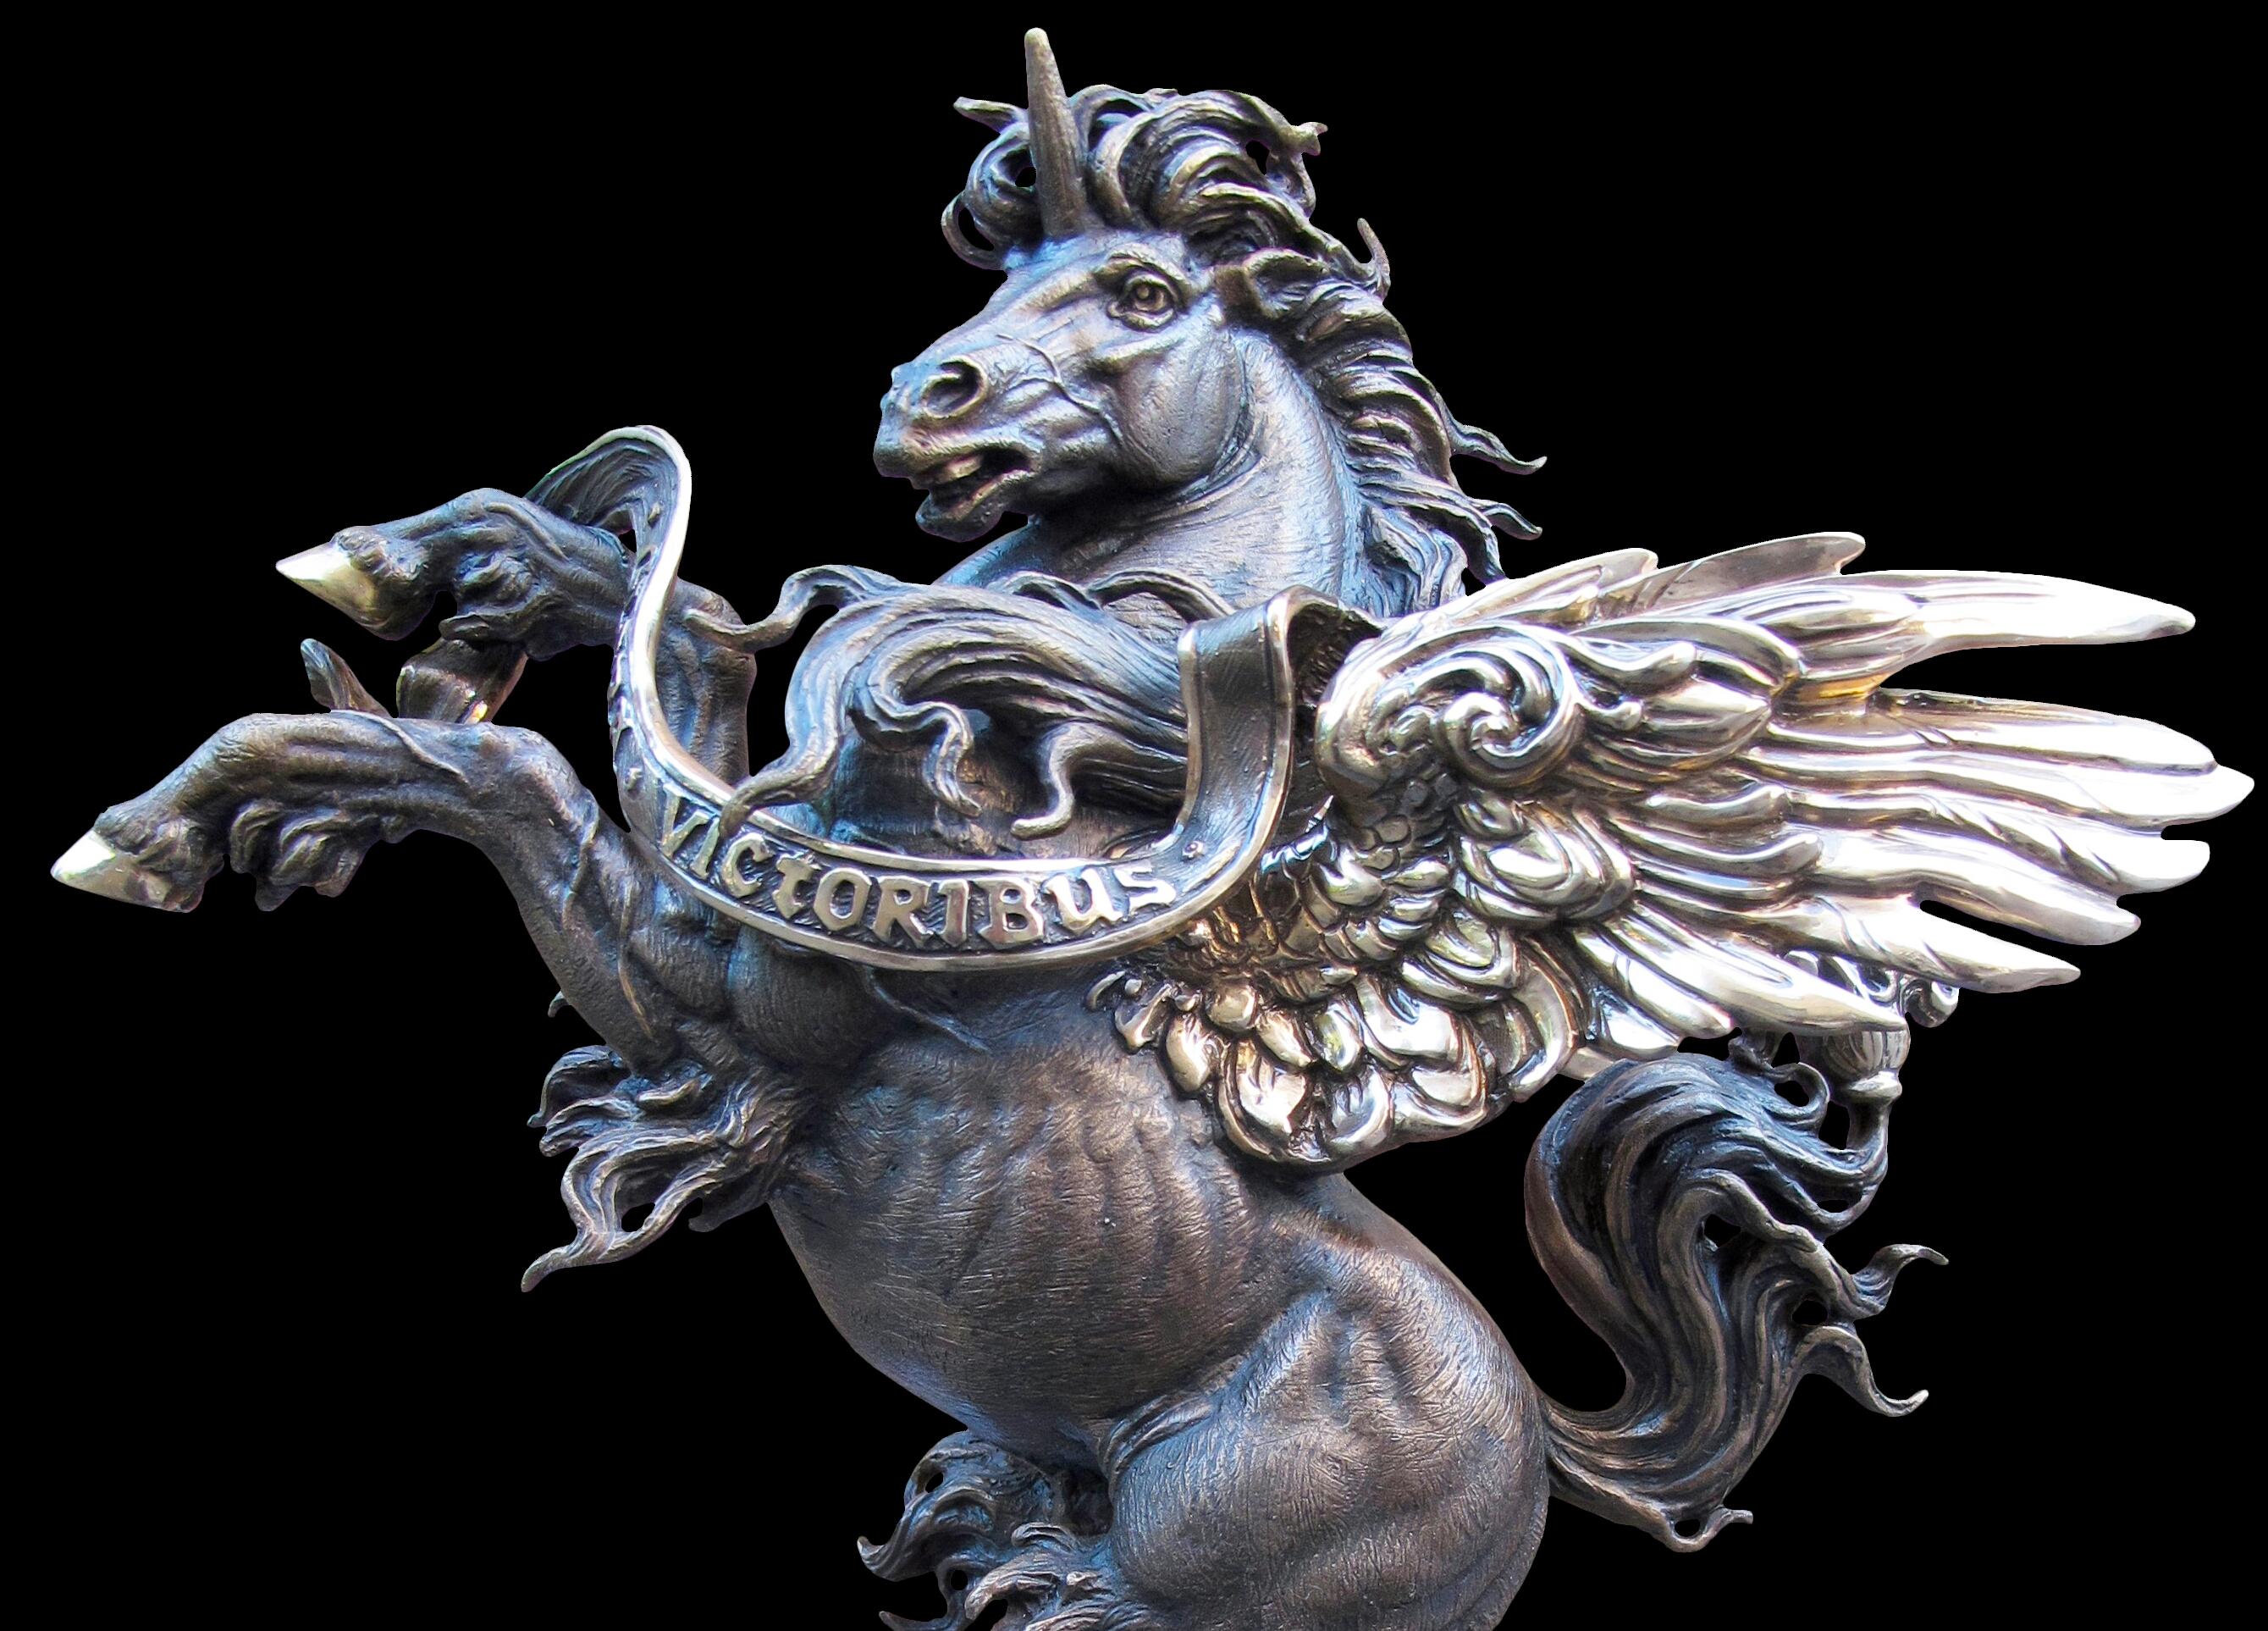 Herac
Pegasus (ancient Greek Pńүaboҫ) in ancient Greek mythology is a winged horse,
music favorite. Pegasi are magnificent aerial horses that often serve
Forces of Good. Pegasus flew across the sky with the speed of the wind, delivered Zeus to